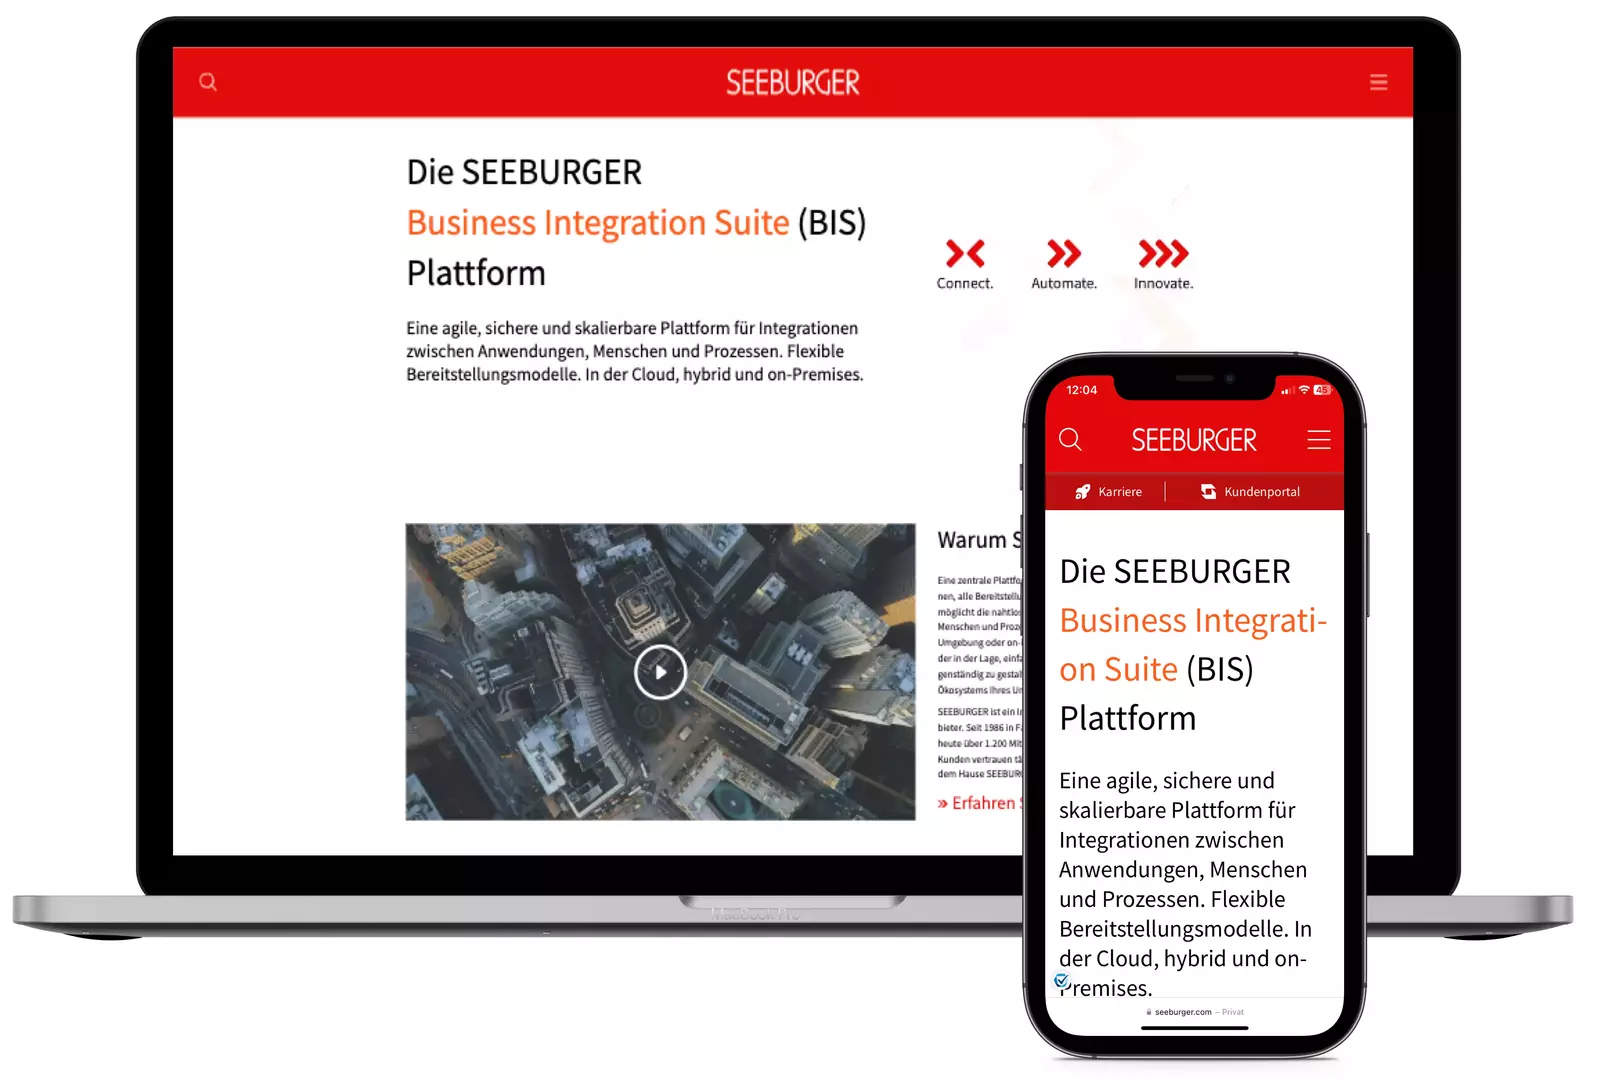 Website of the Seeburger AG